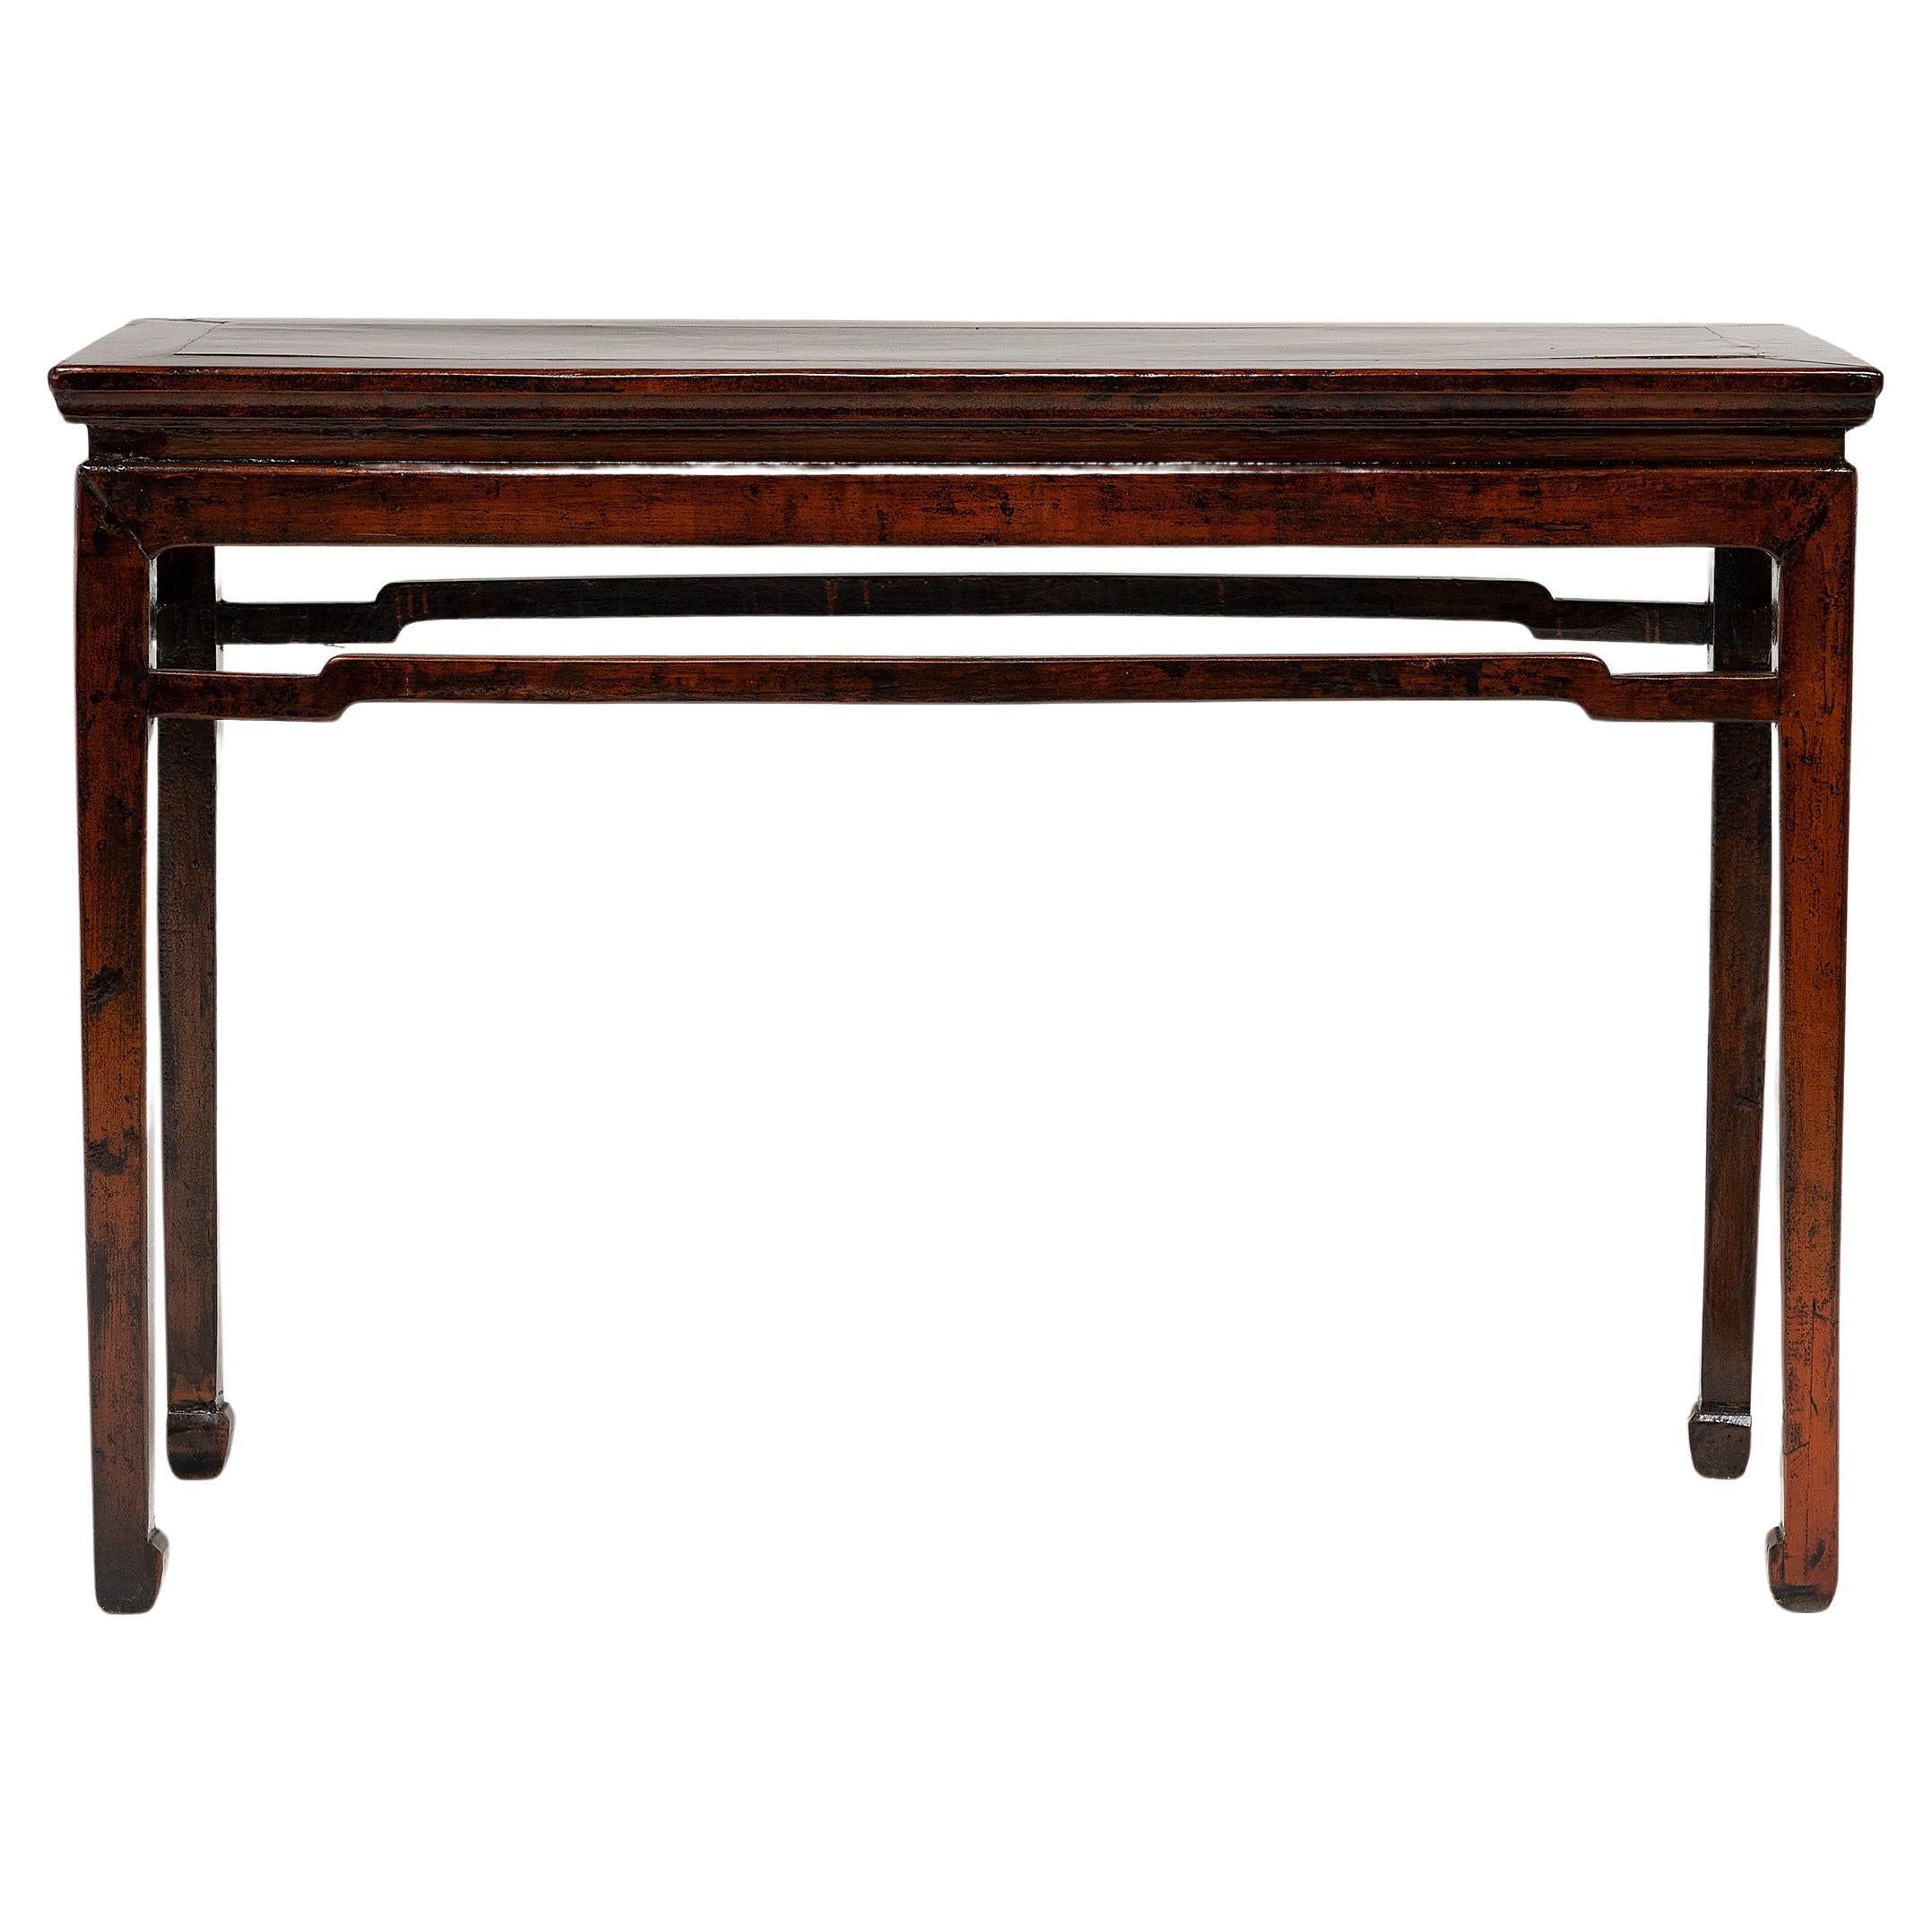 Chinese Persimmon Lacquer Altar Table, c. 1900 For Sale